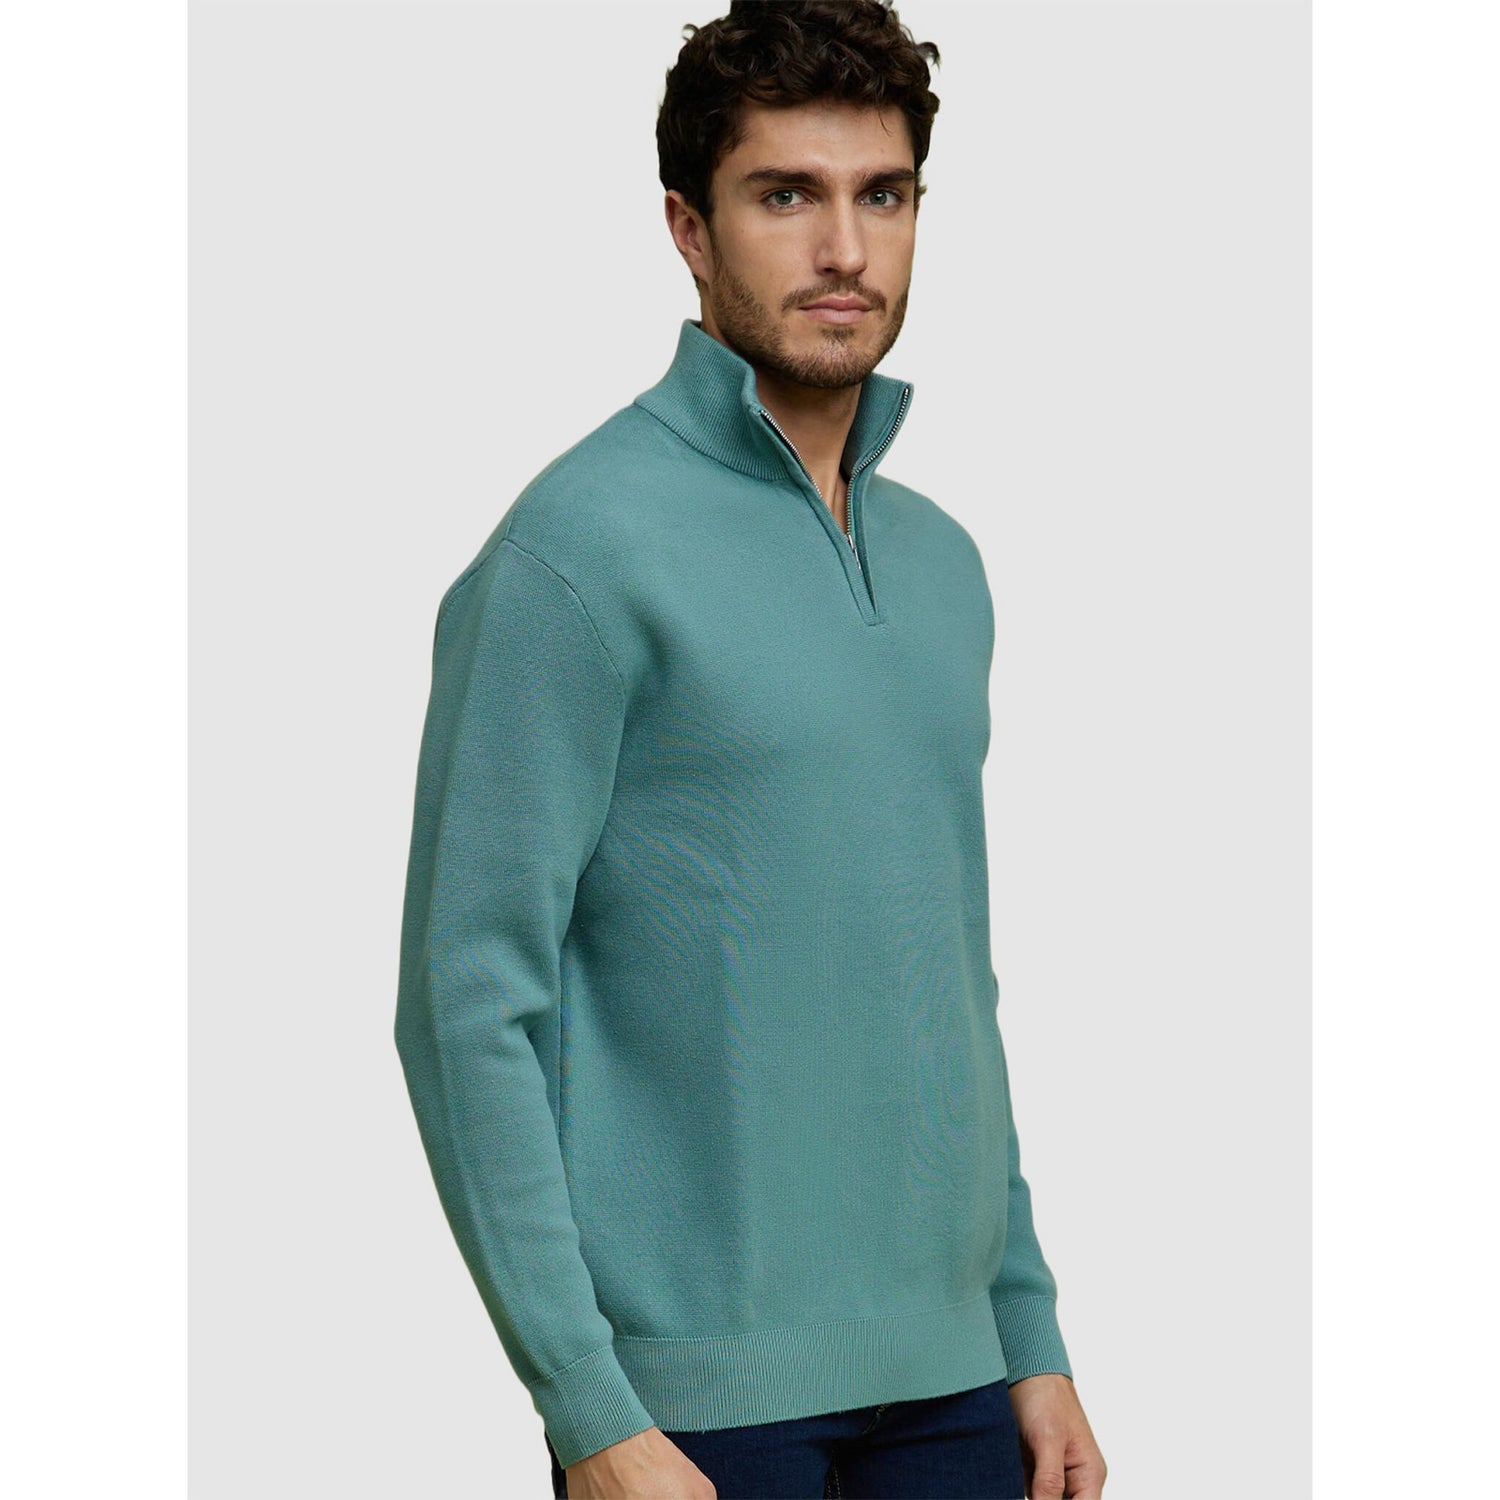 Green Solid Cotton Long Sleeves Pullover Sweater (CEHALFY)